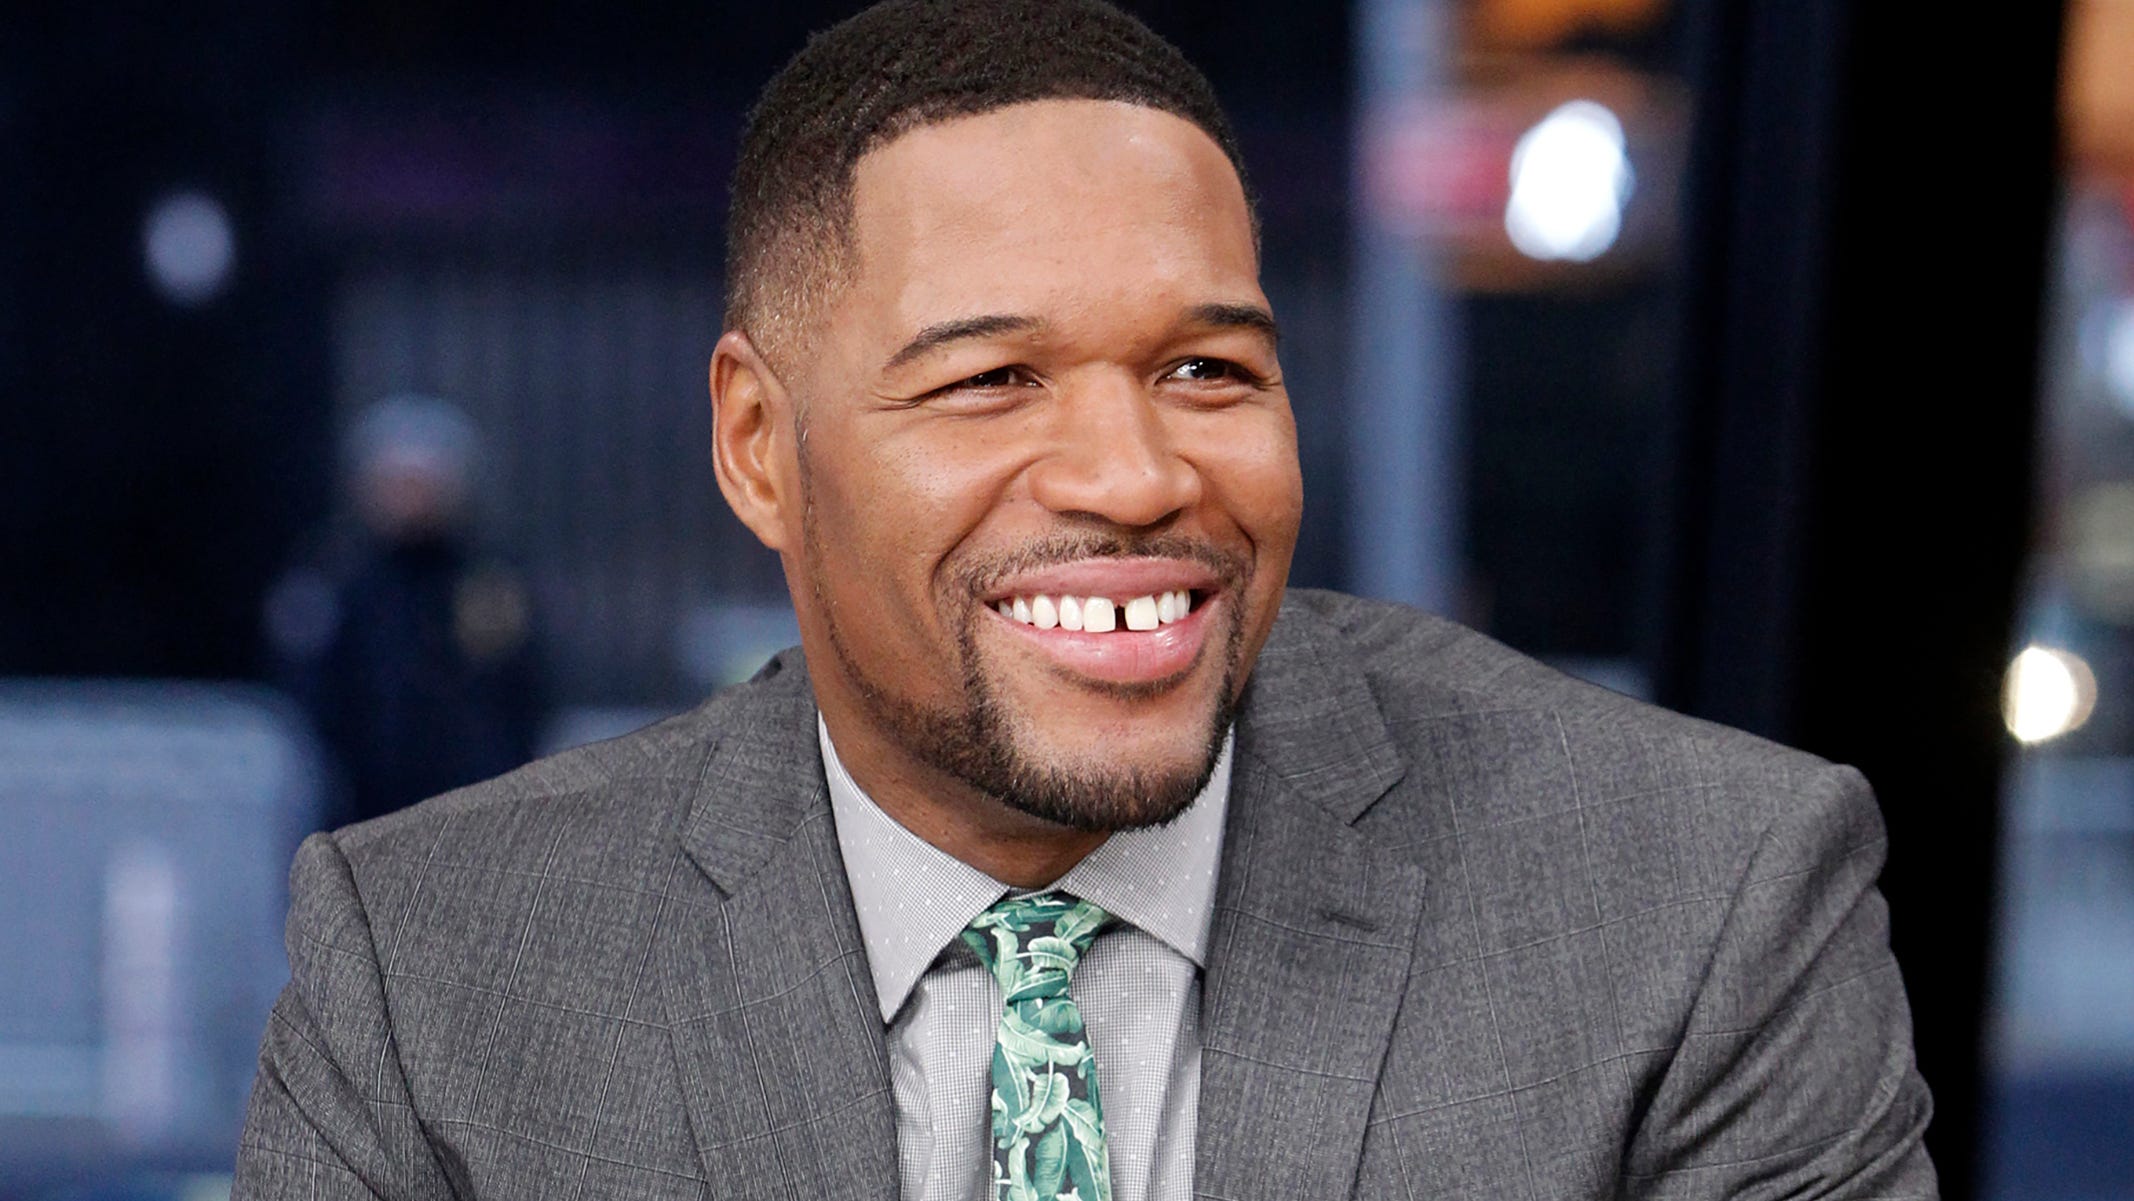 Smiling Michael Strahan wearing a gray suit